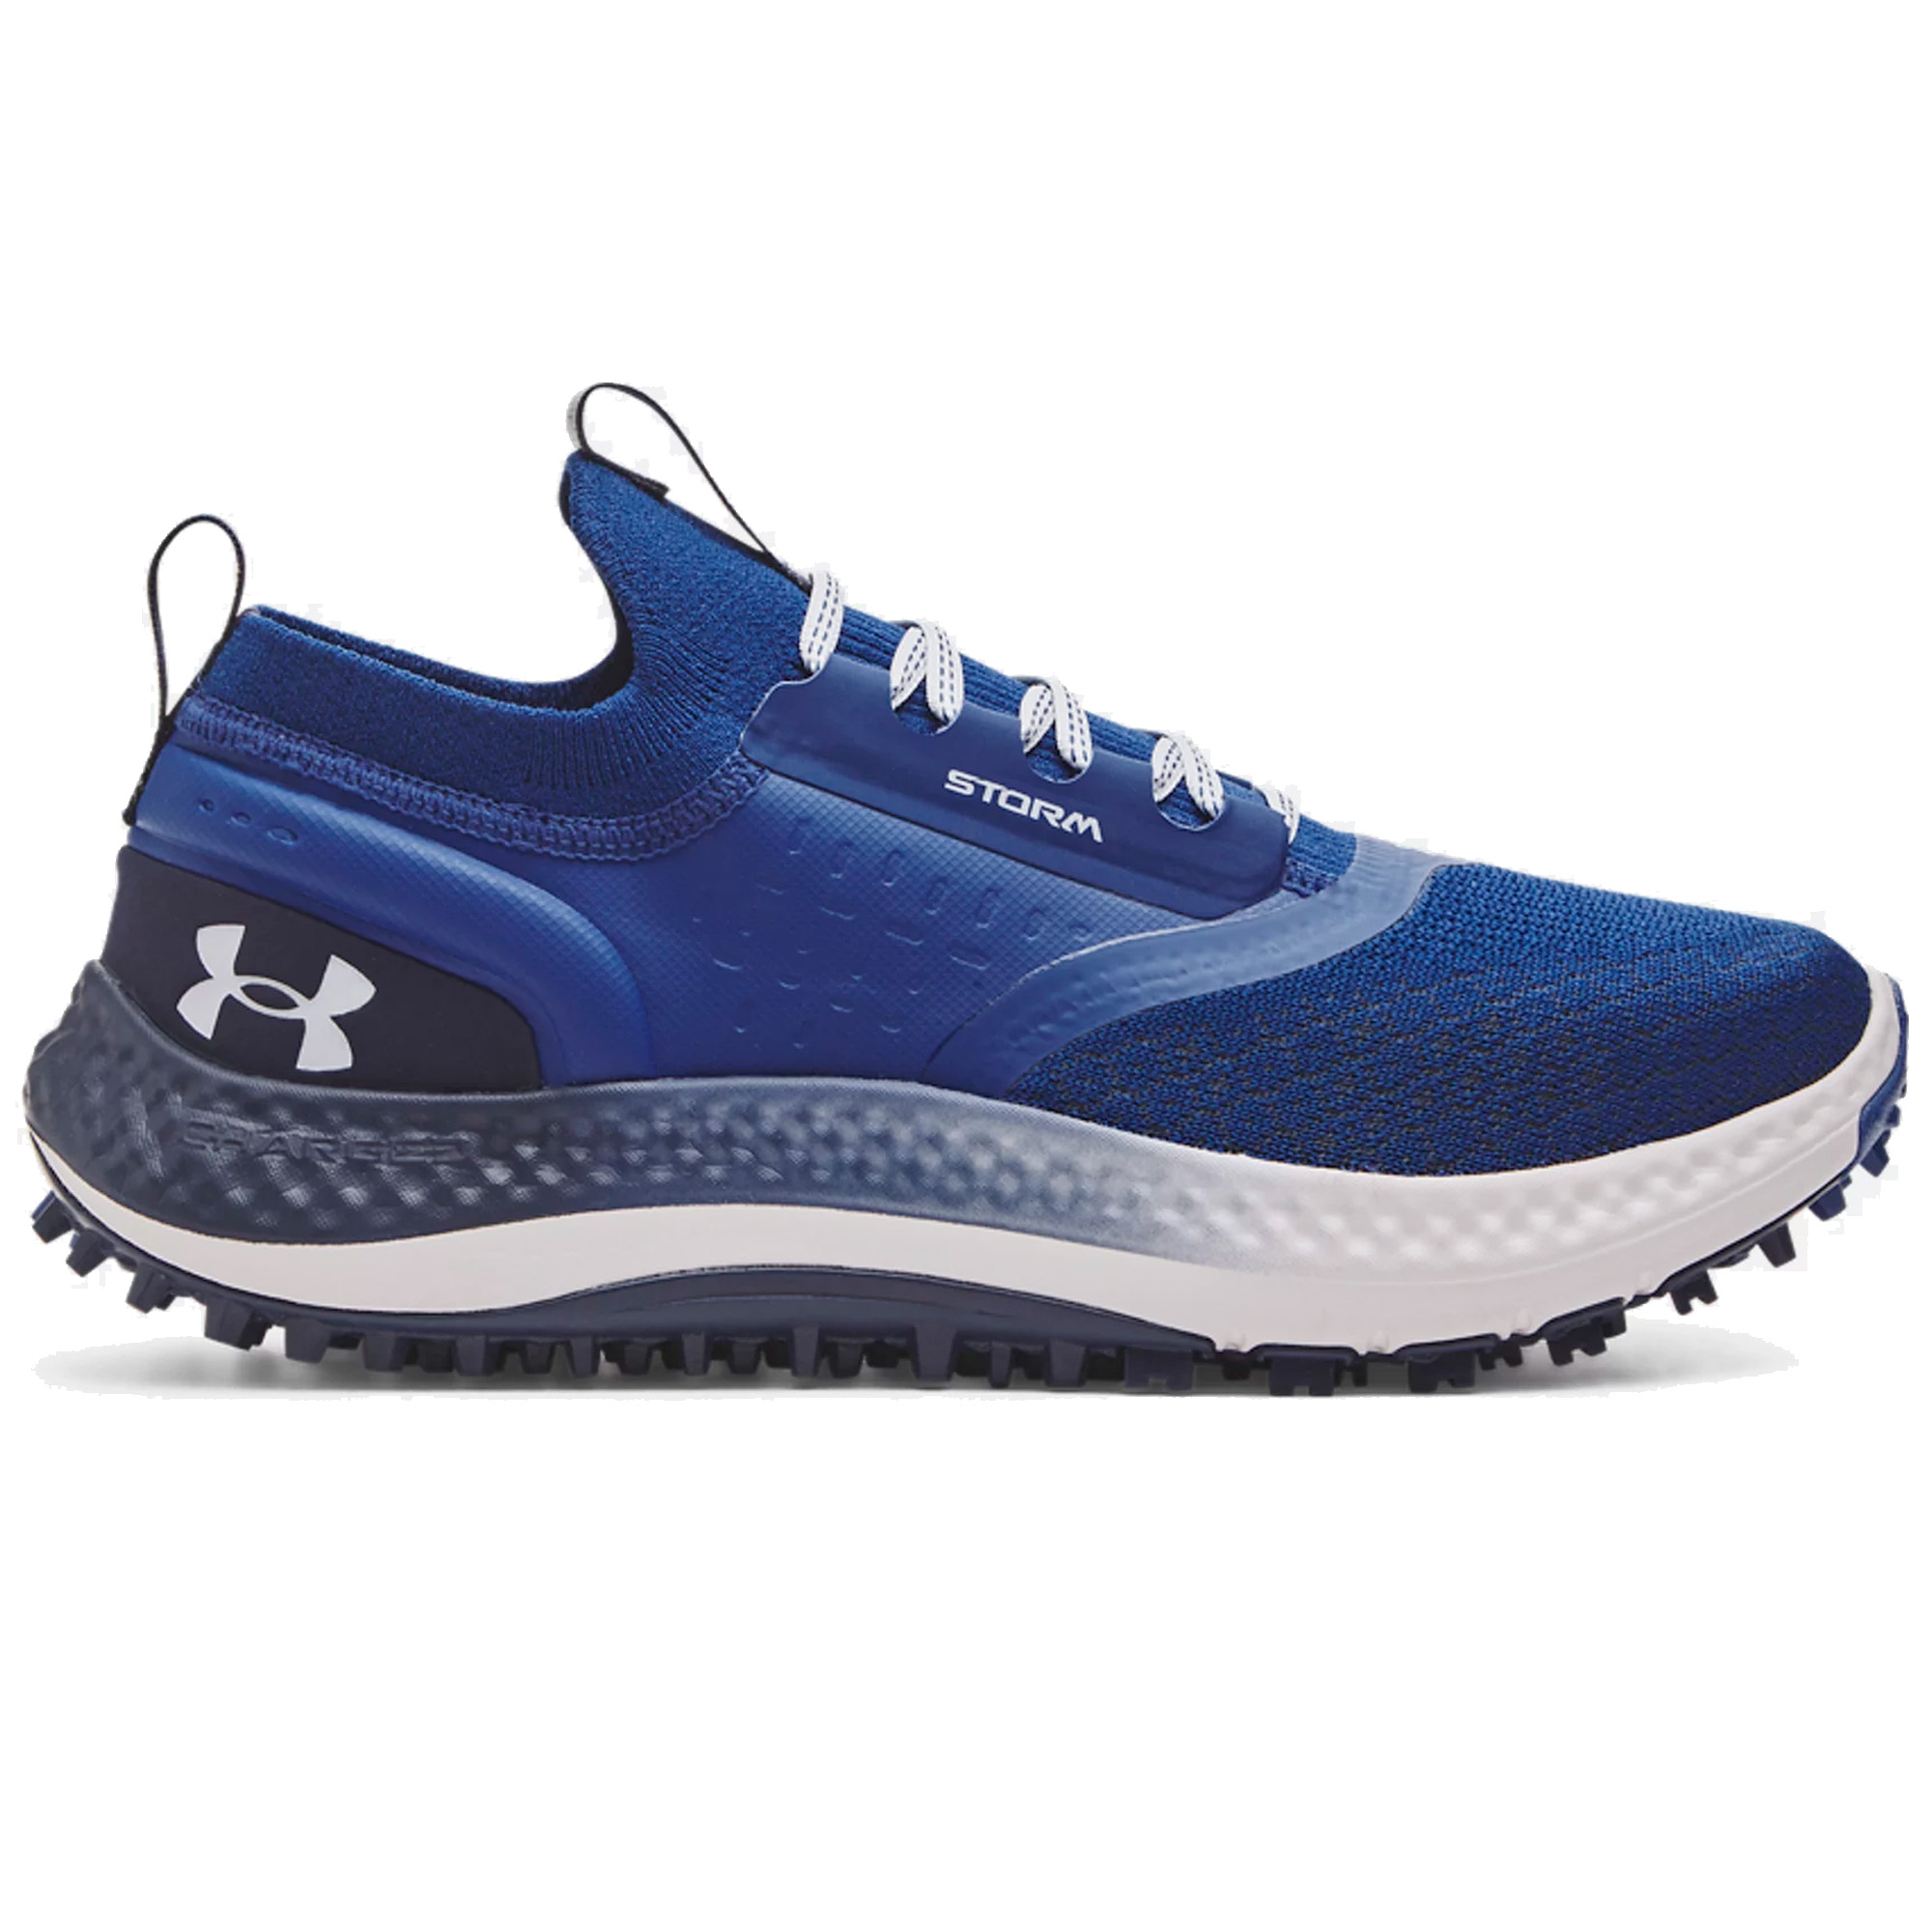 Under Armour Mens UA Charged Phantom SL Golf Shoes  - Blue Mirage/Midnight Navy